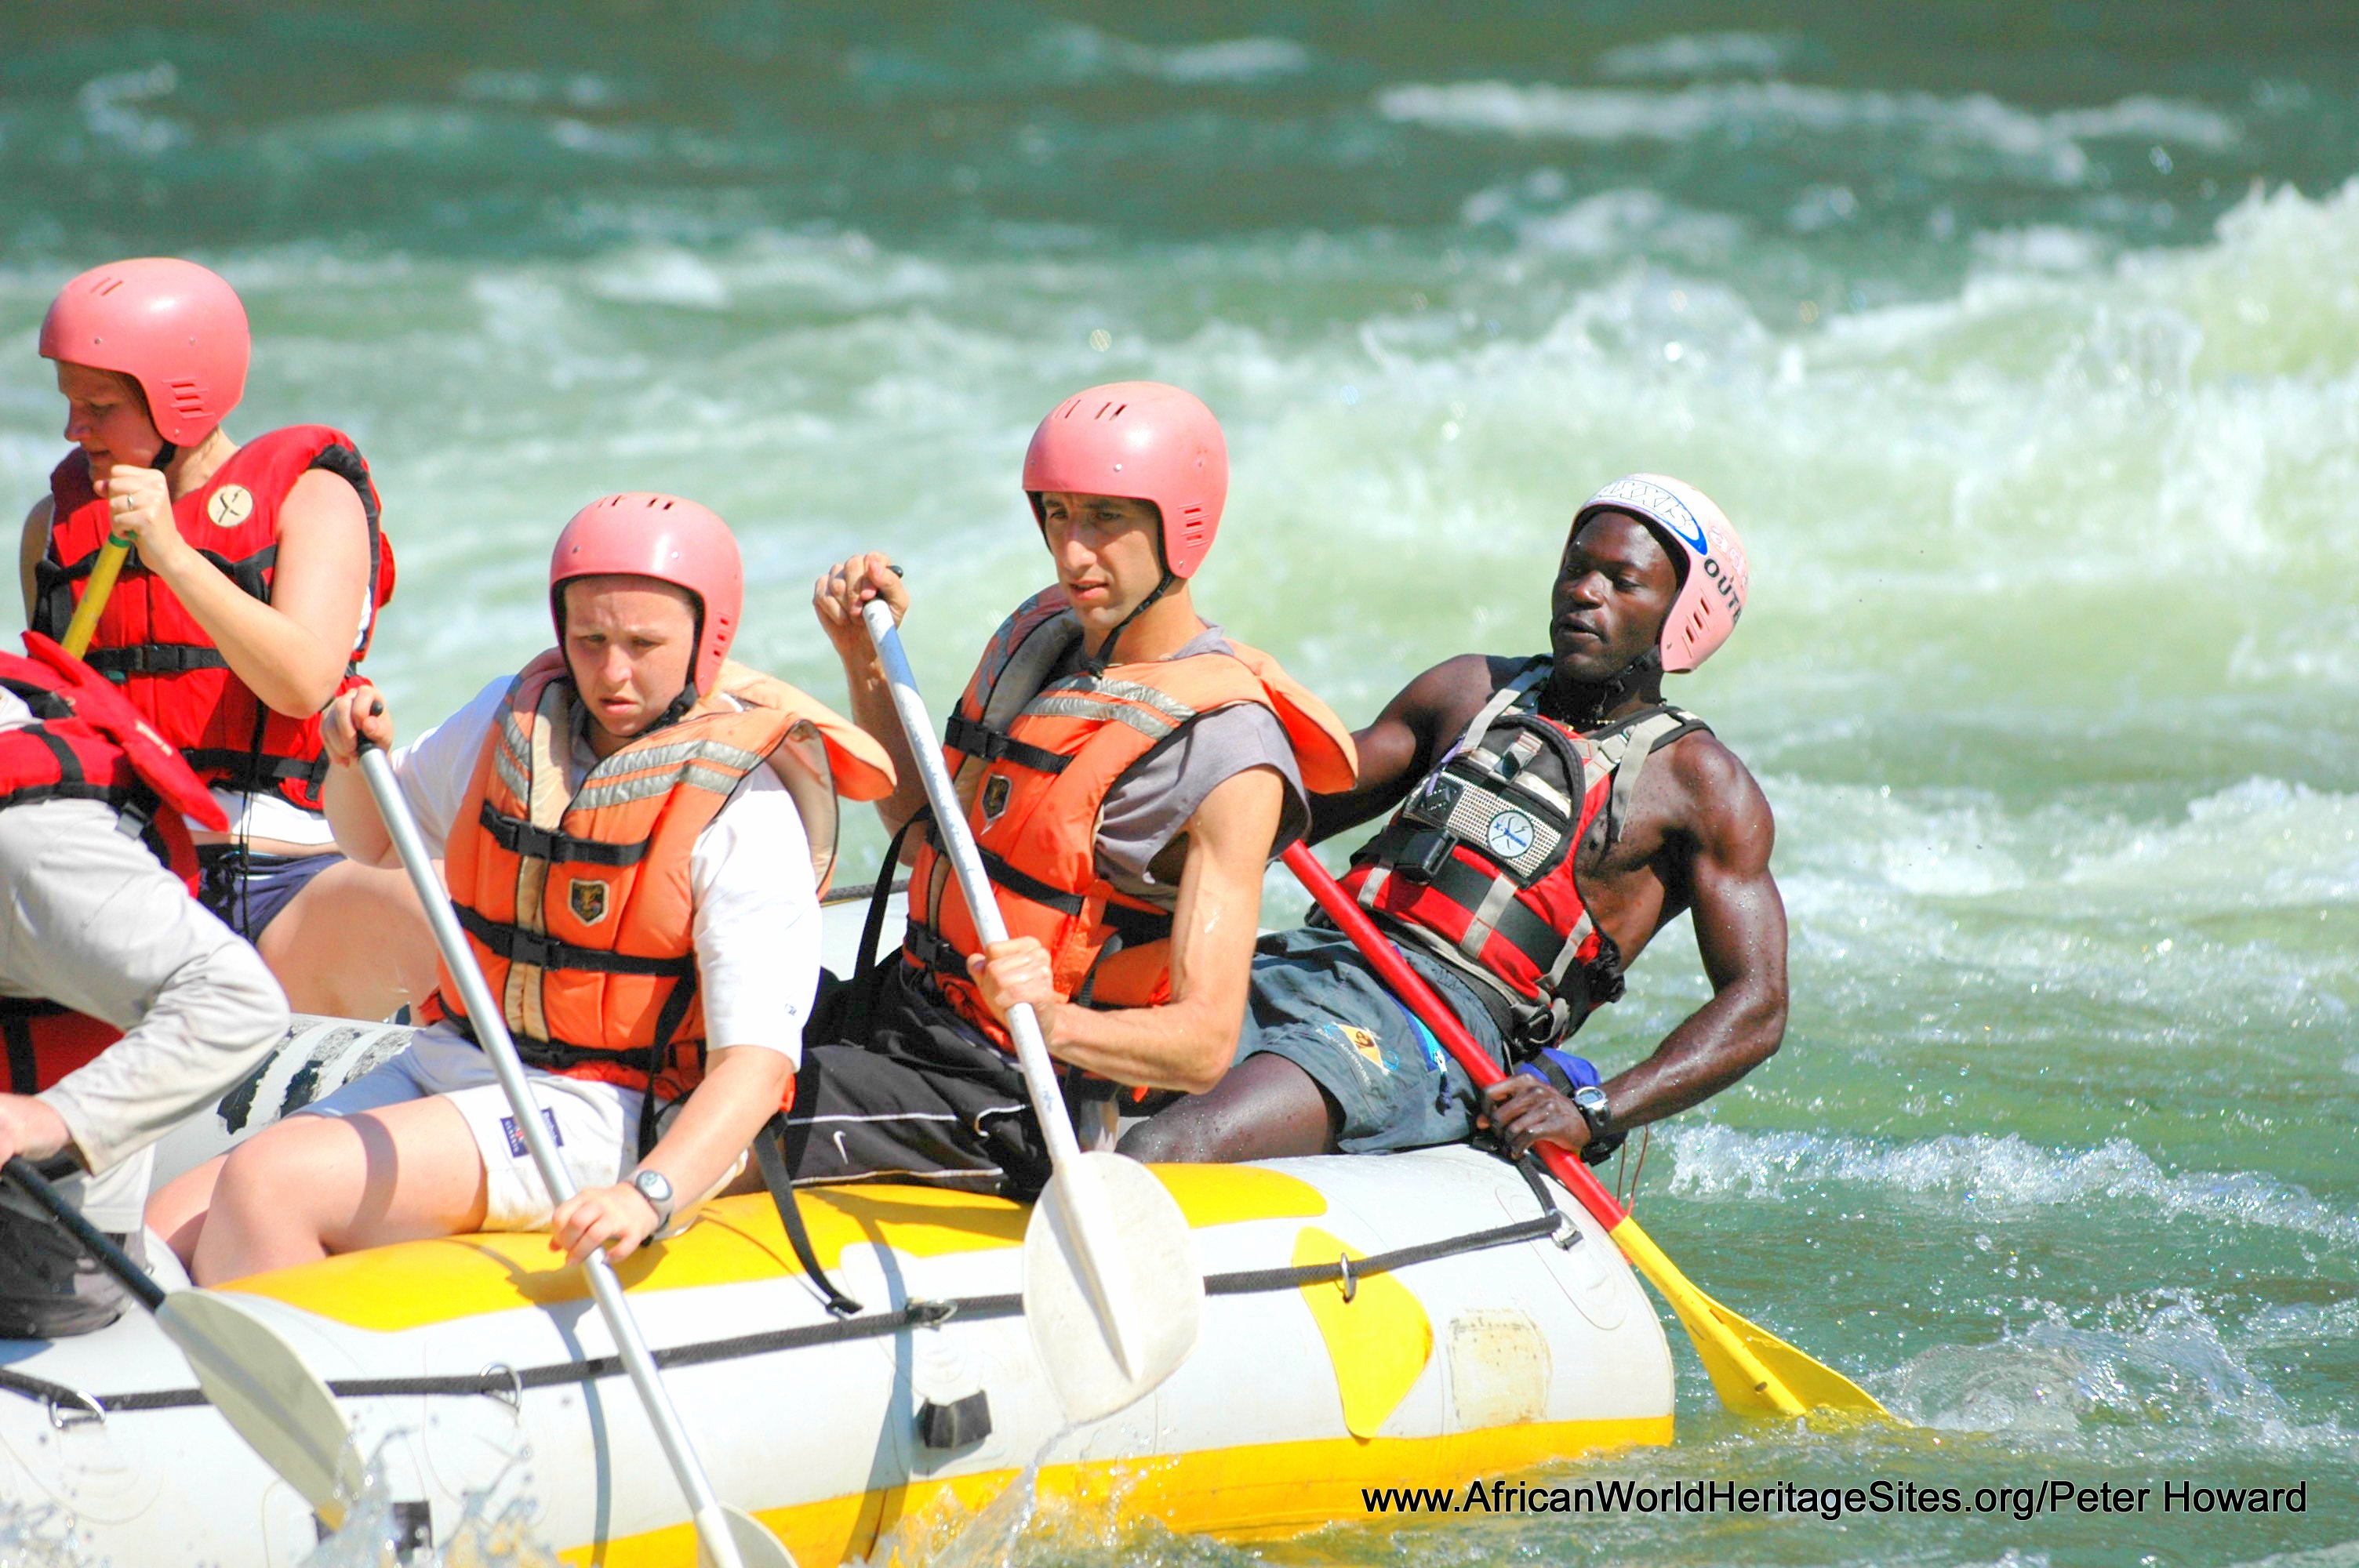 White-water rafting is a popular activity in the Zambezi River rapids below Victoria Falls